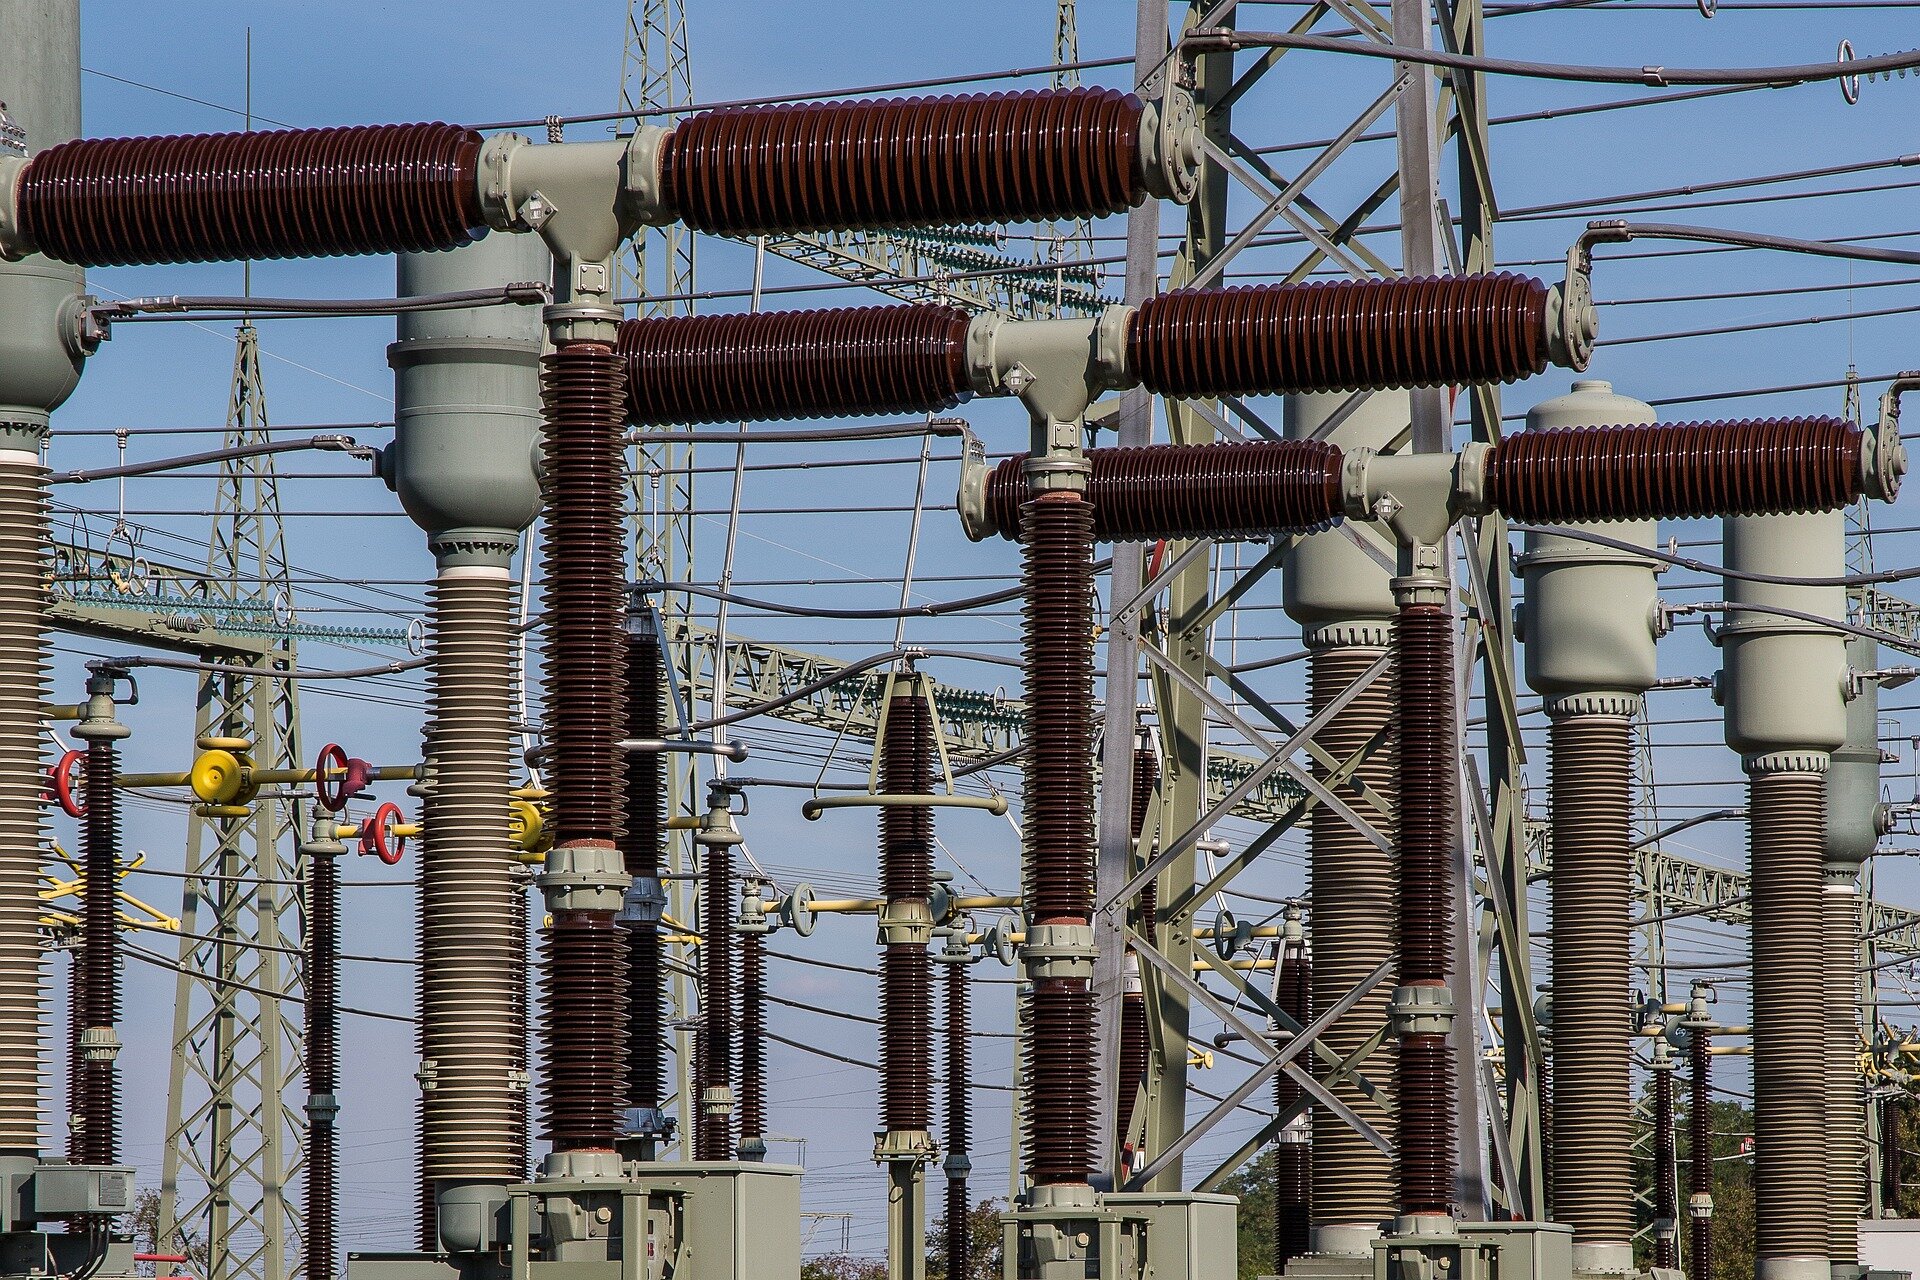 #Why is the electric grid so hard to protect?